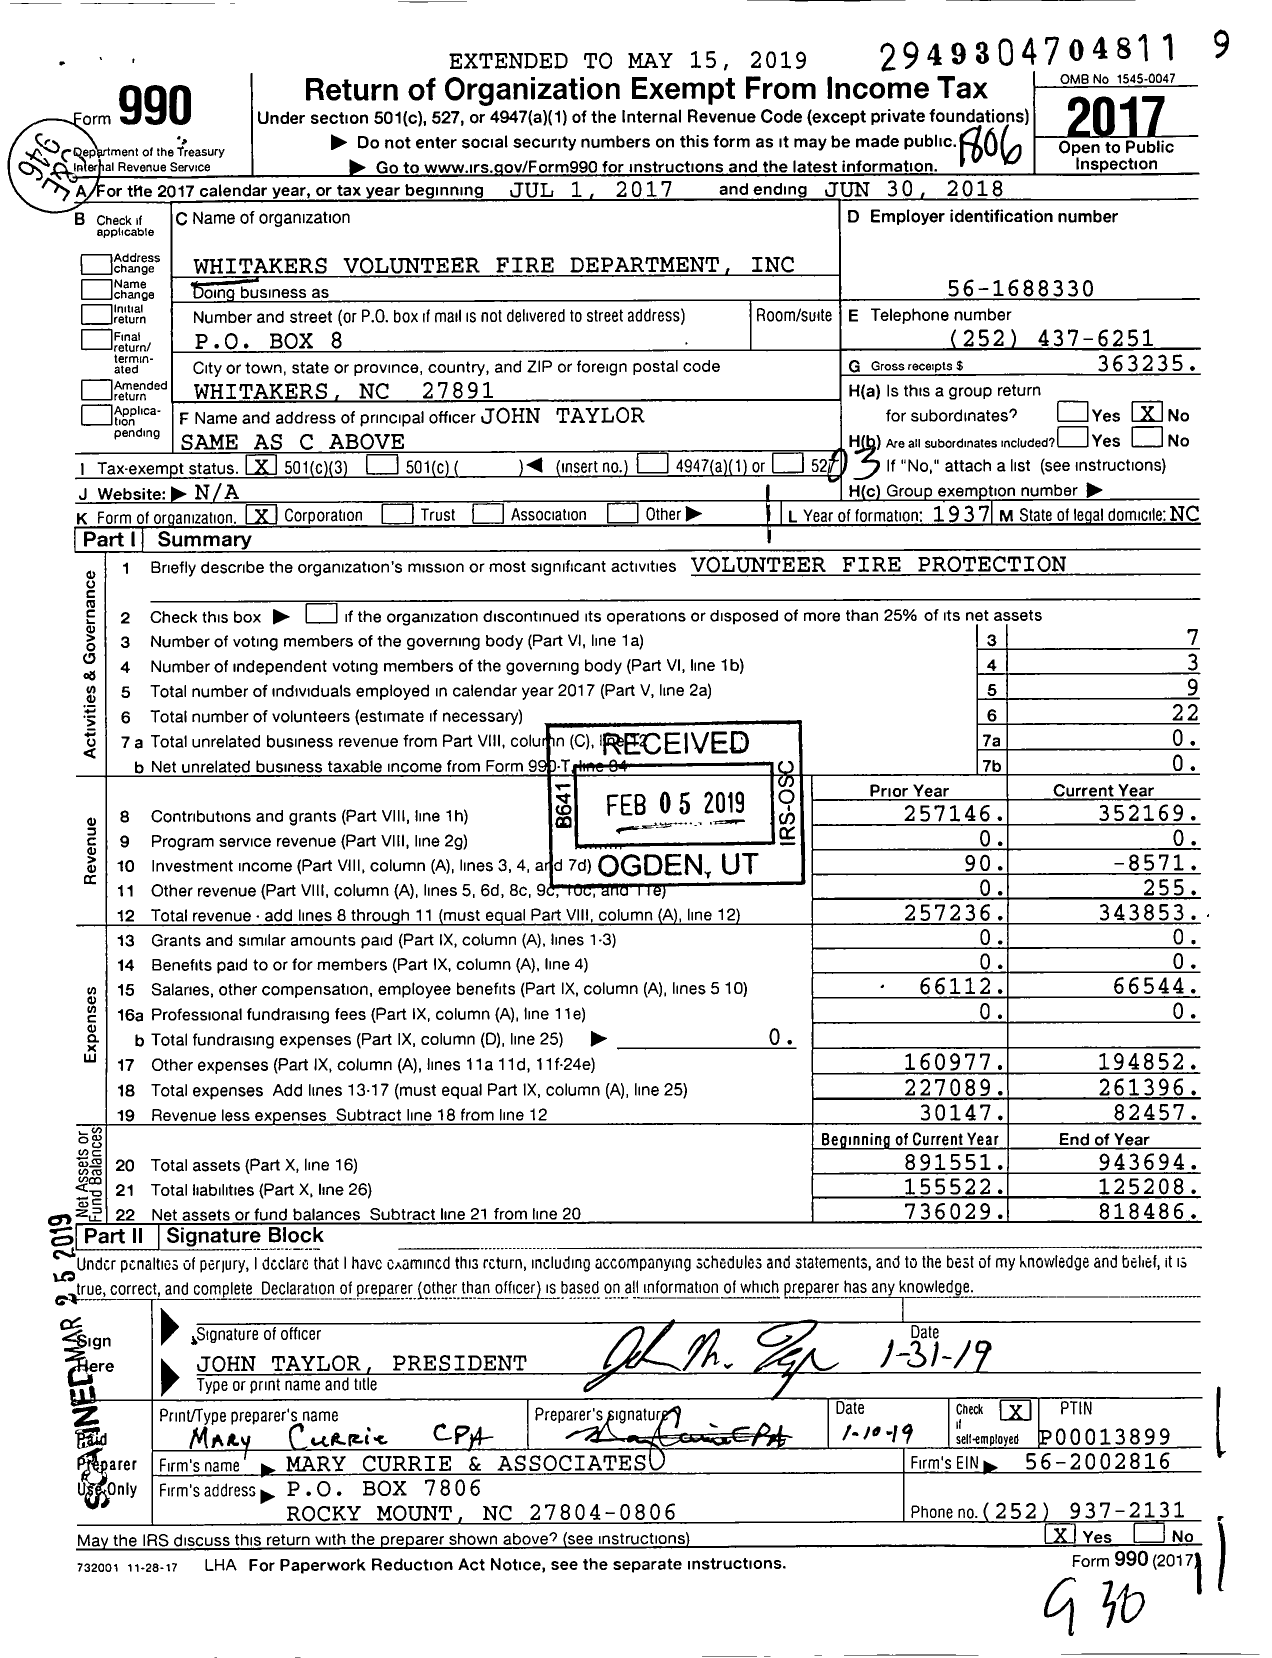 Image of first page of 2017 Form 990 for Whitakers Volunteer Fire Department